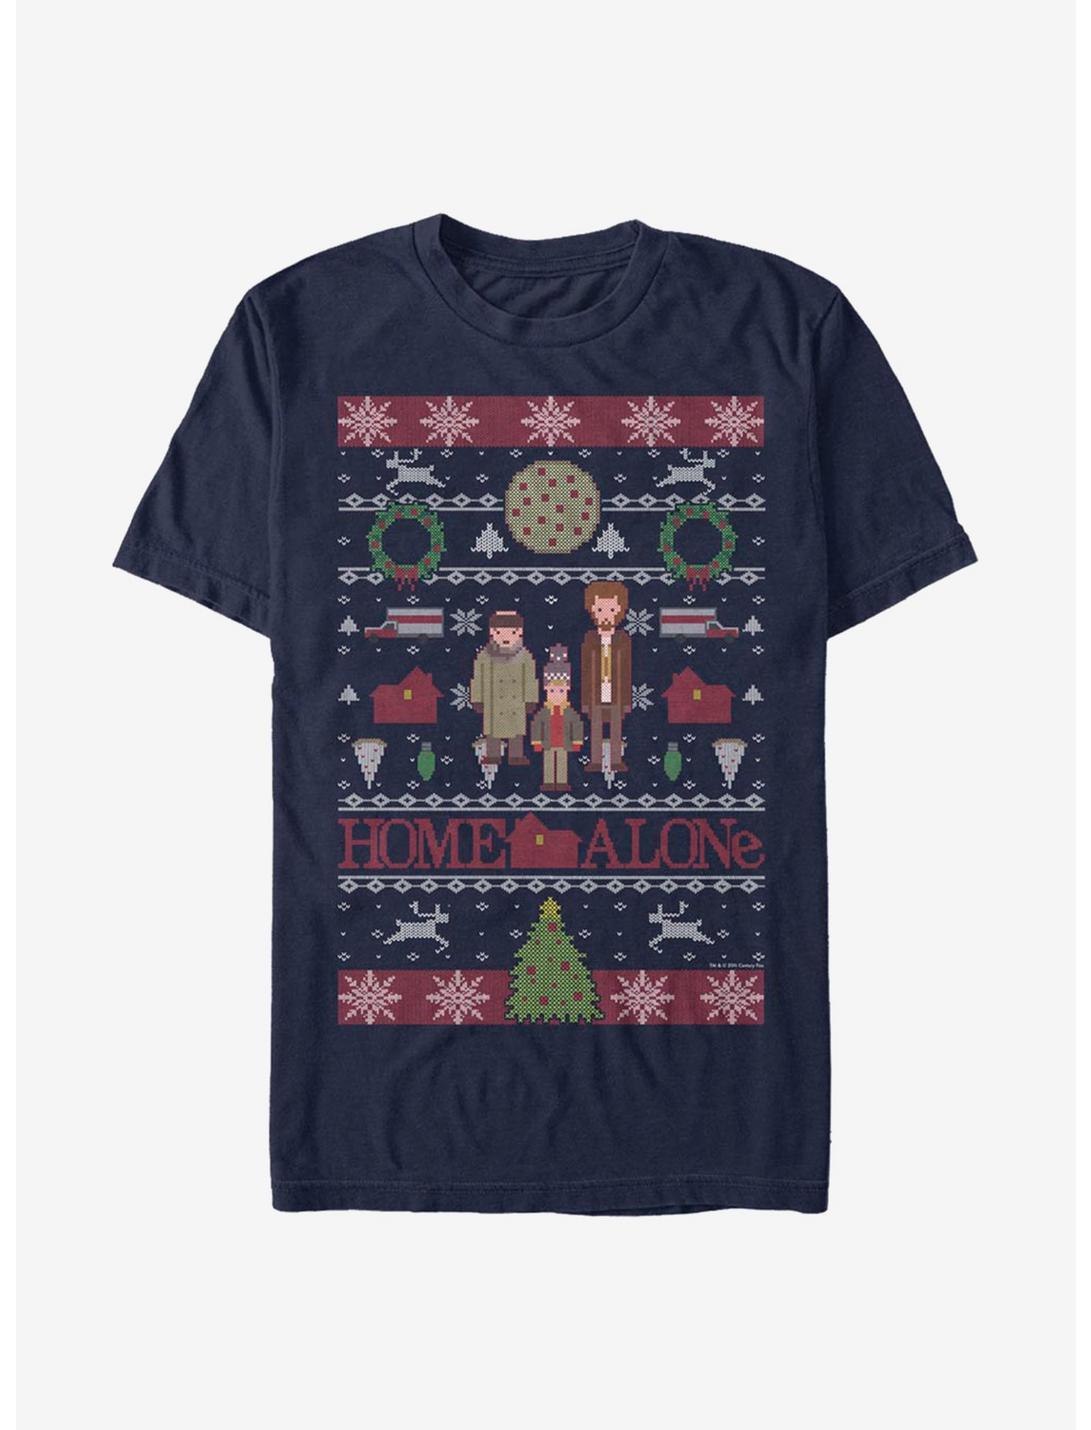 Home Alone Sweater Alone T-Shirt, NAVY, hi-res